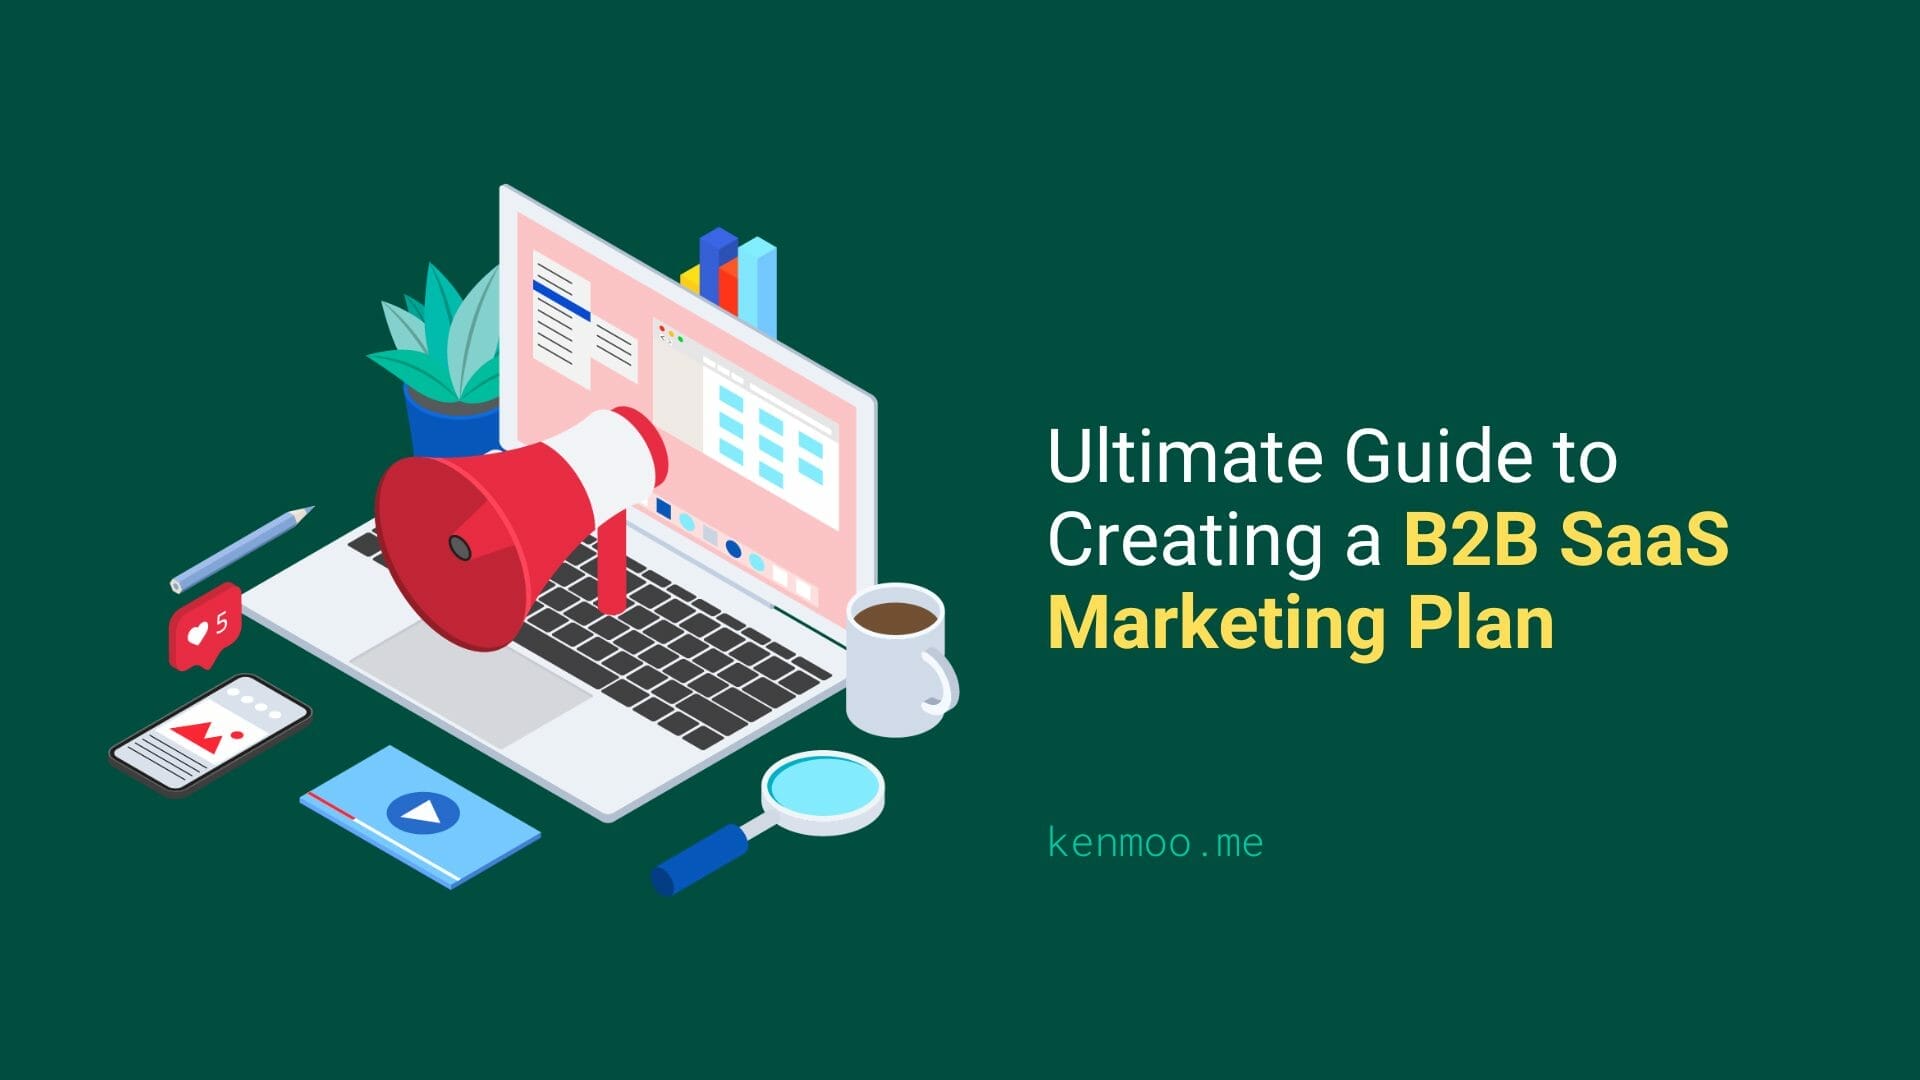 Ultimate Guide to Creating a B2B SaaS Marketing Plan